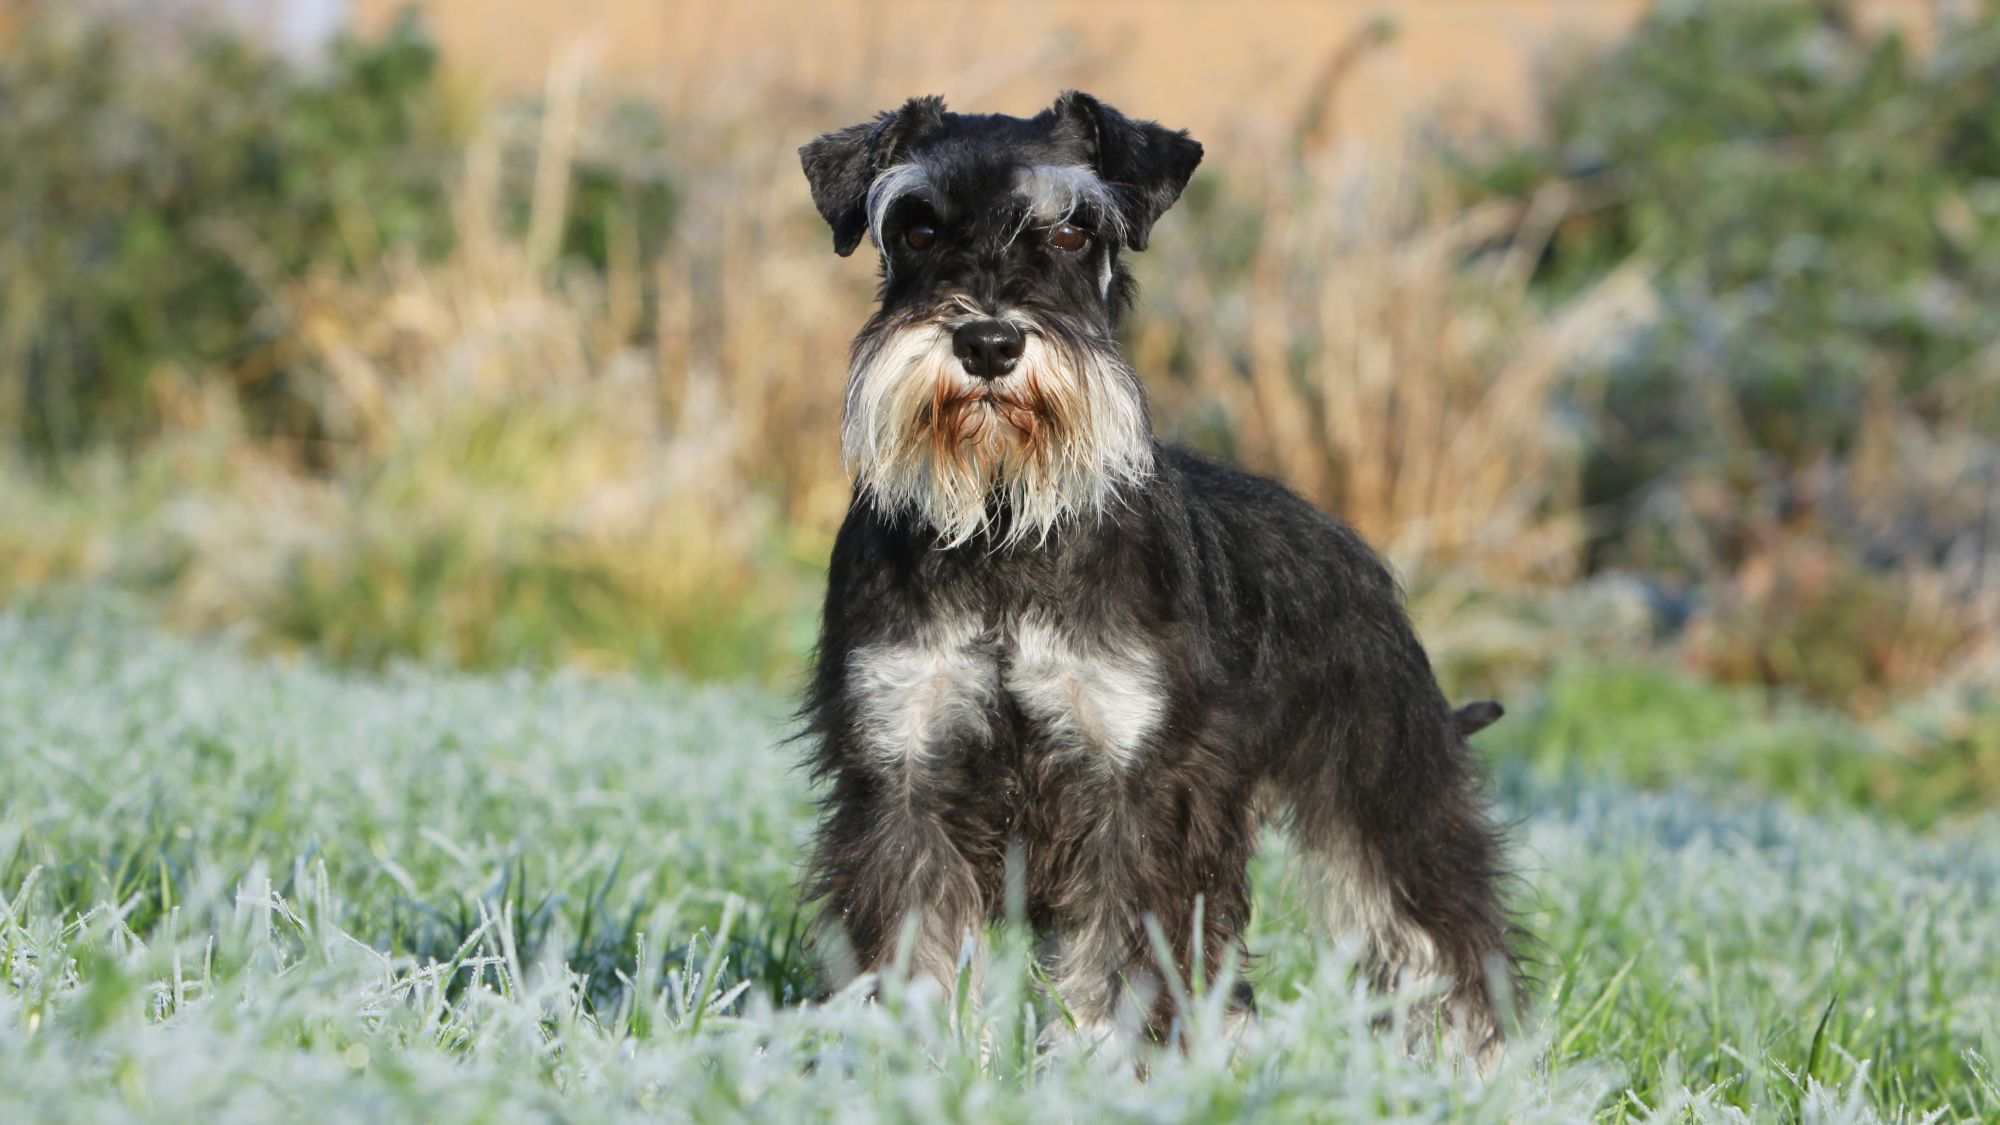 Miniature Schnauzer stood in frosty grass looking right at the camera